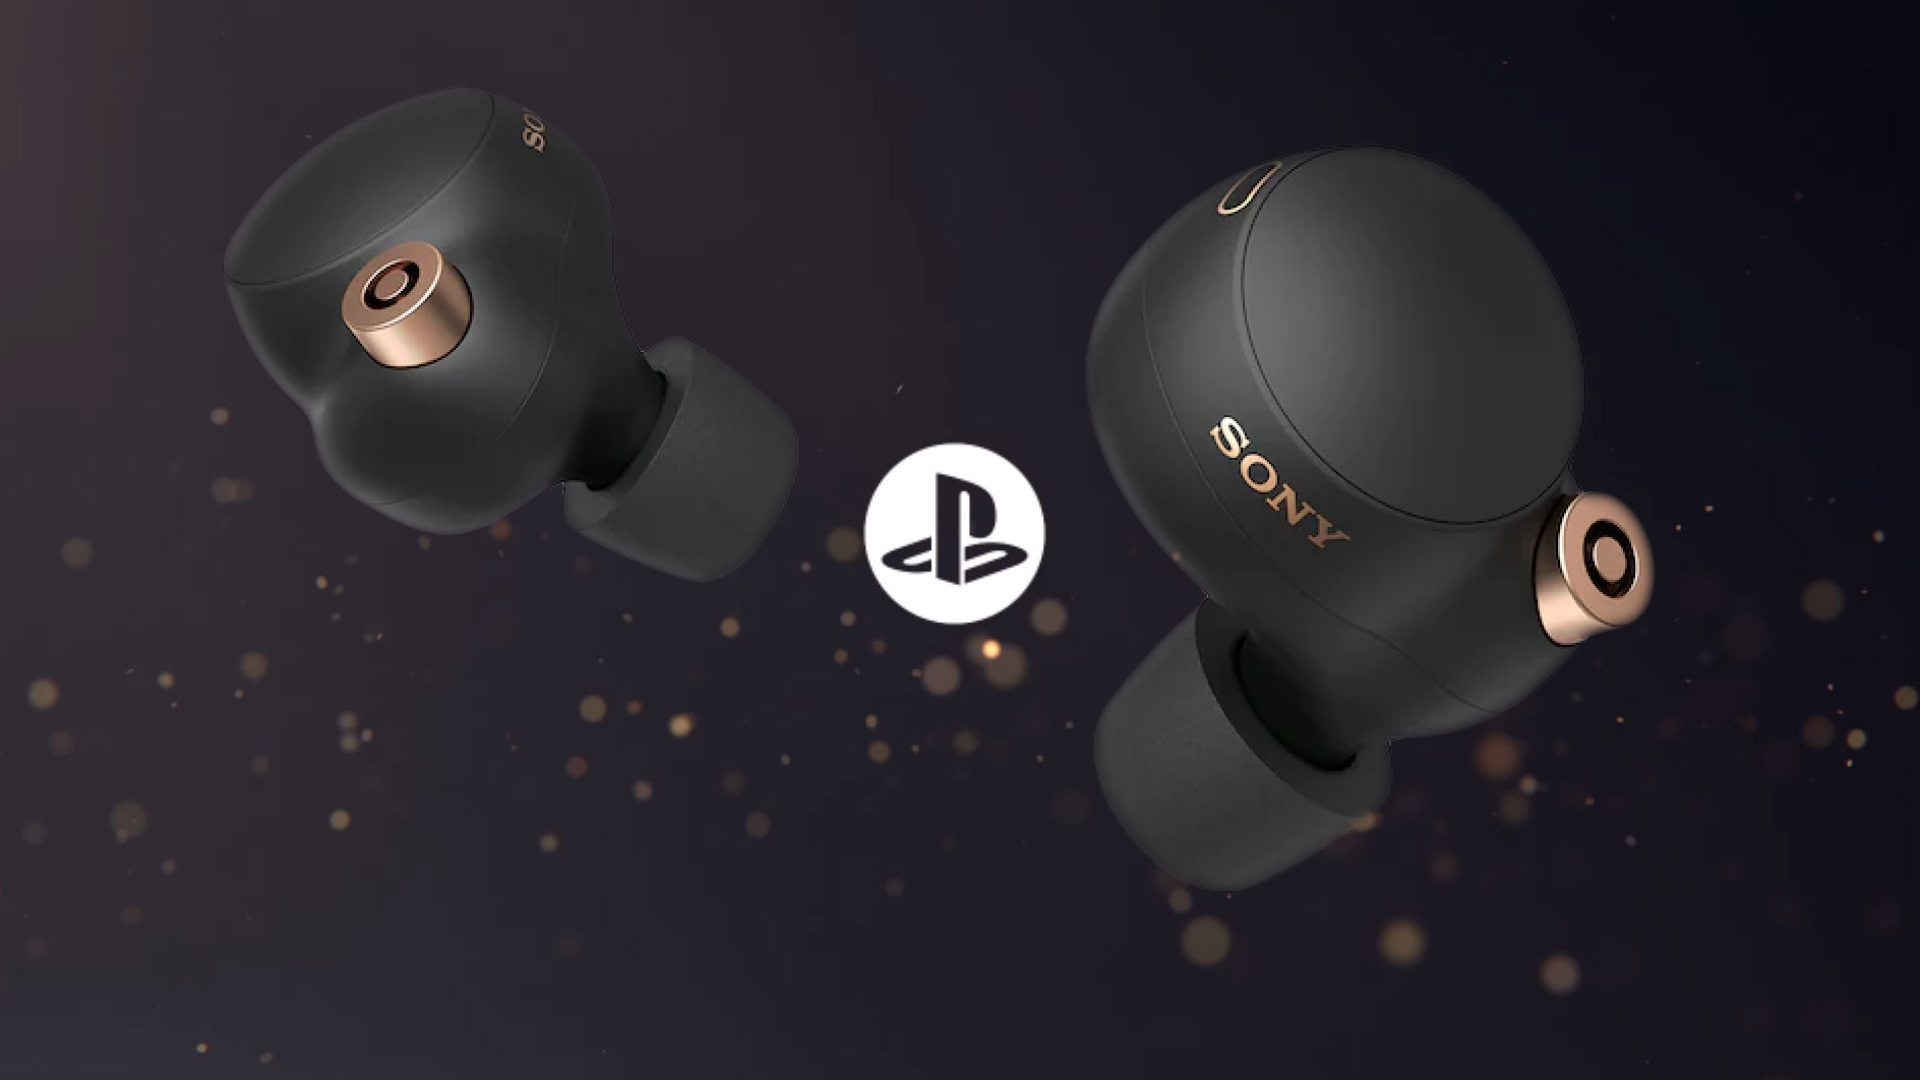 Sony reportedly working on PS5 earbuds that could rival Apple Airpods |  TechRadar